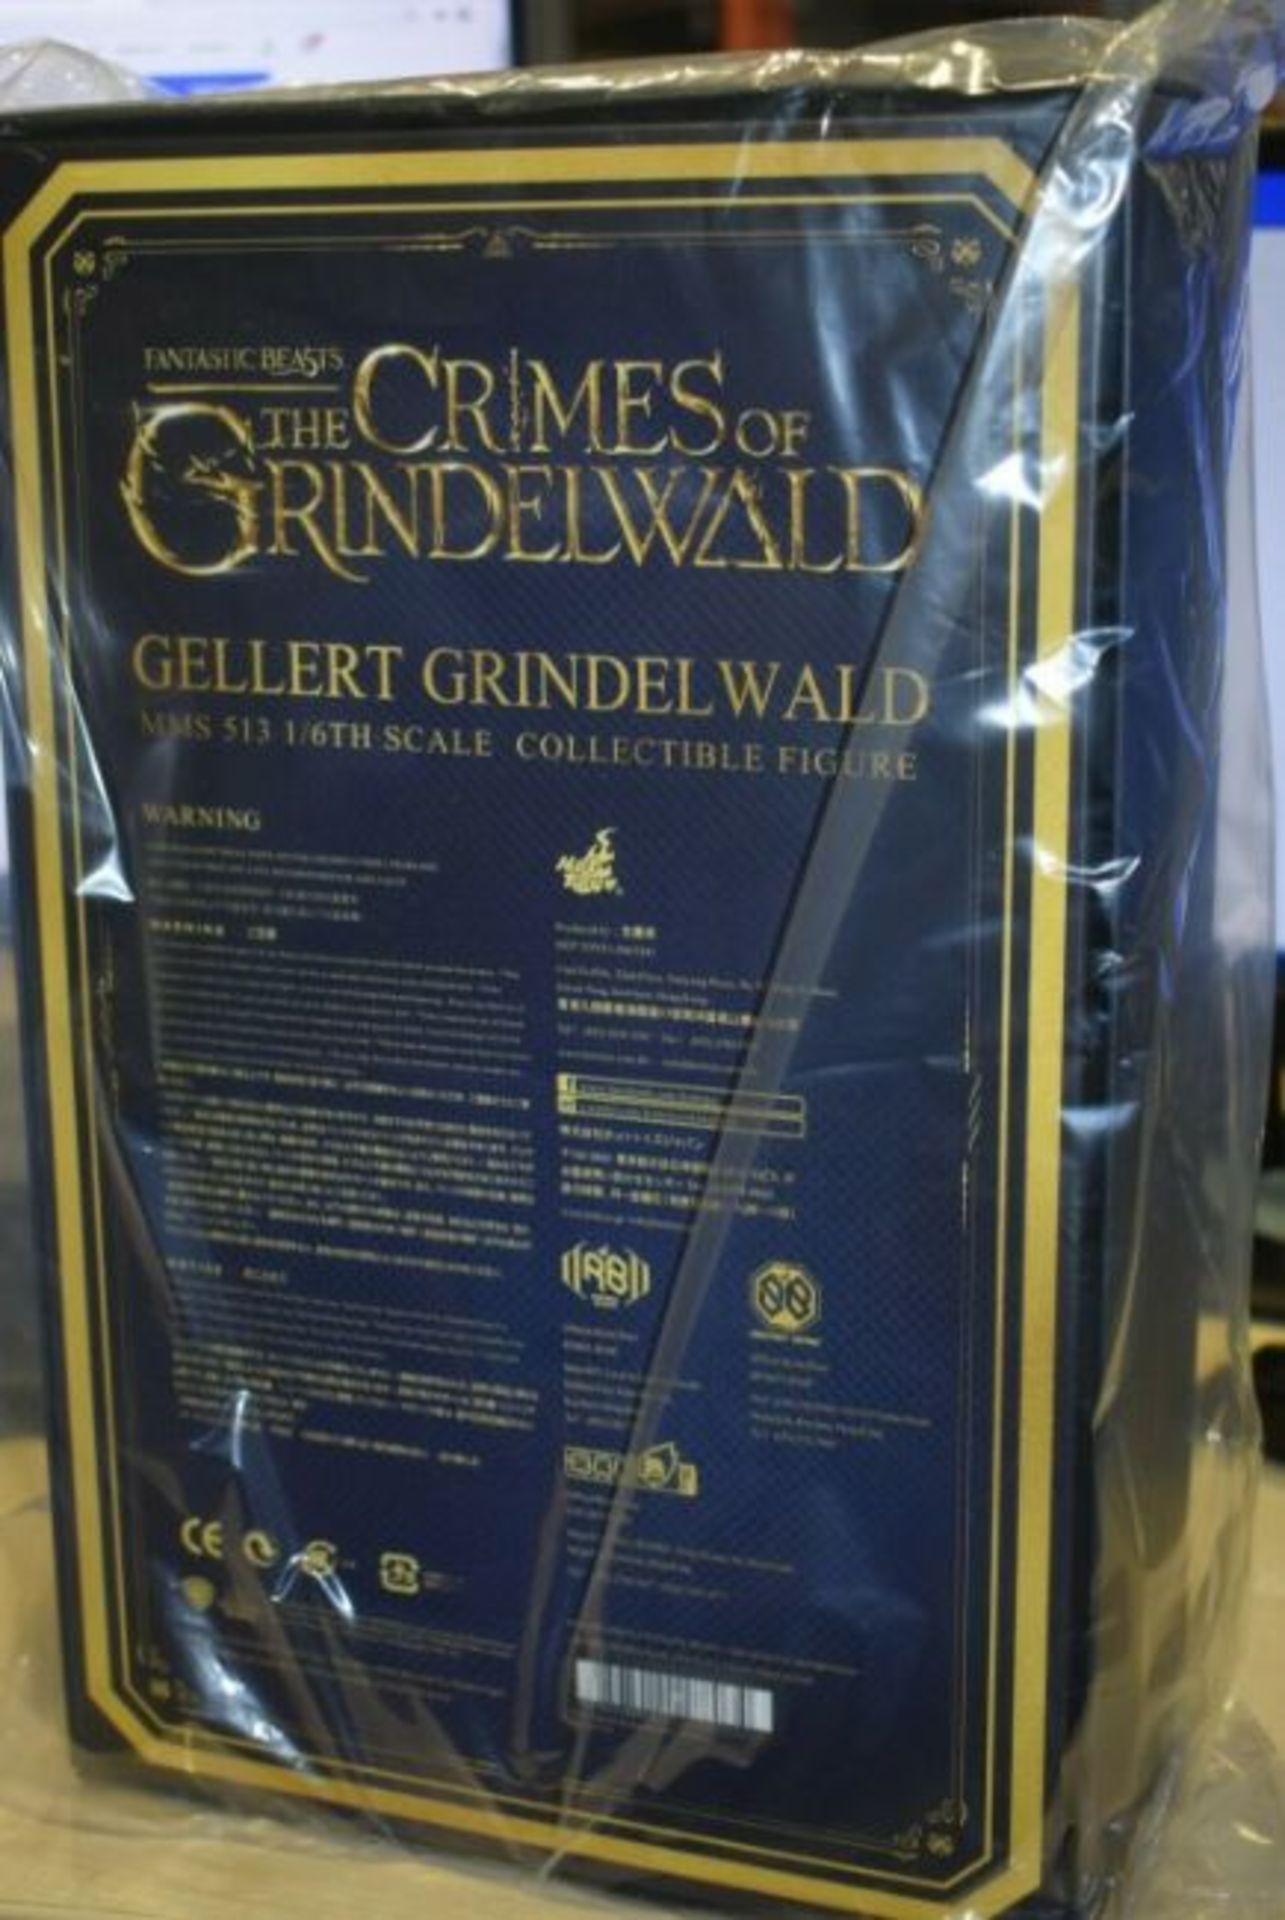 1 x Hot Toys Fantastic Beasts Gellert Grindelwald Special Edition 1/6 Scale Figurine - MMS513 - - Image 3 of 4